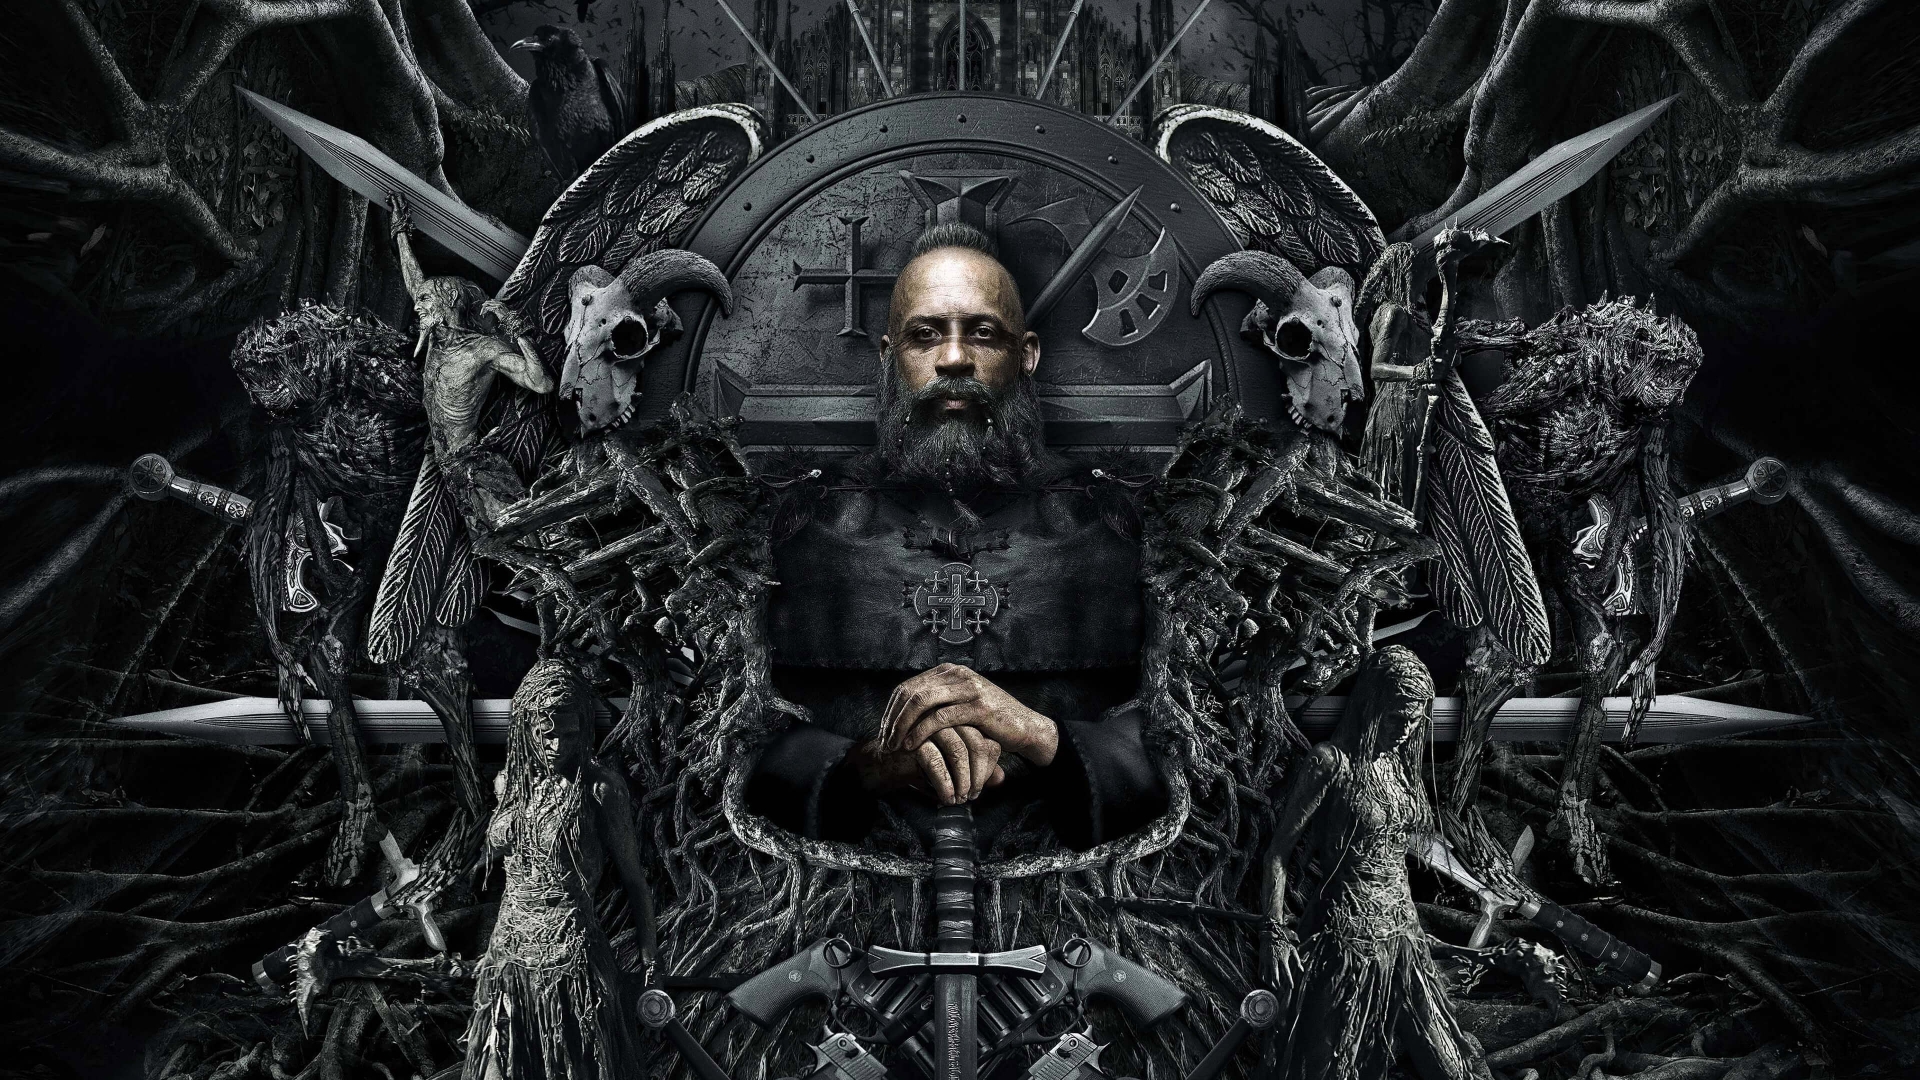 The Last Witch Hunter Throne for 1920 x 1080 HDTV 1080p resolution